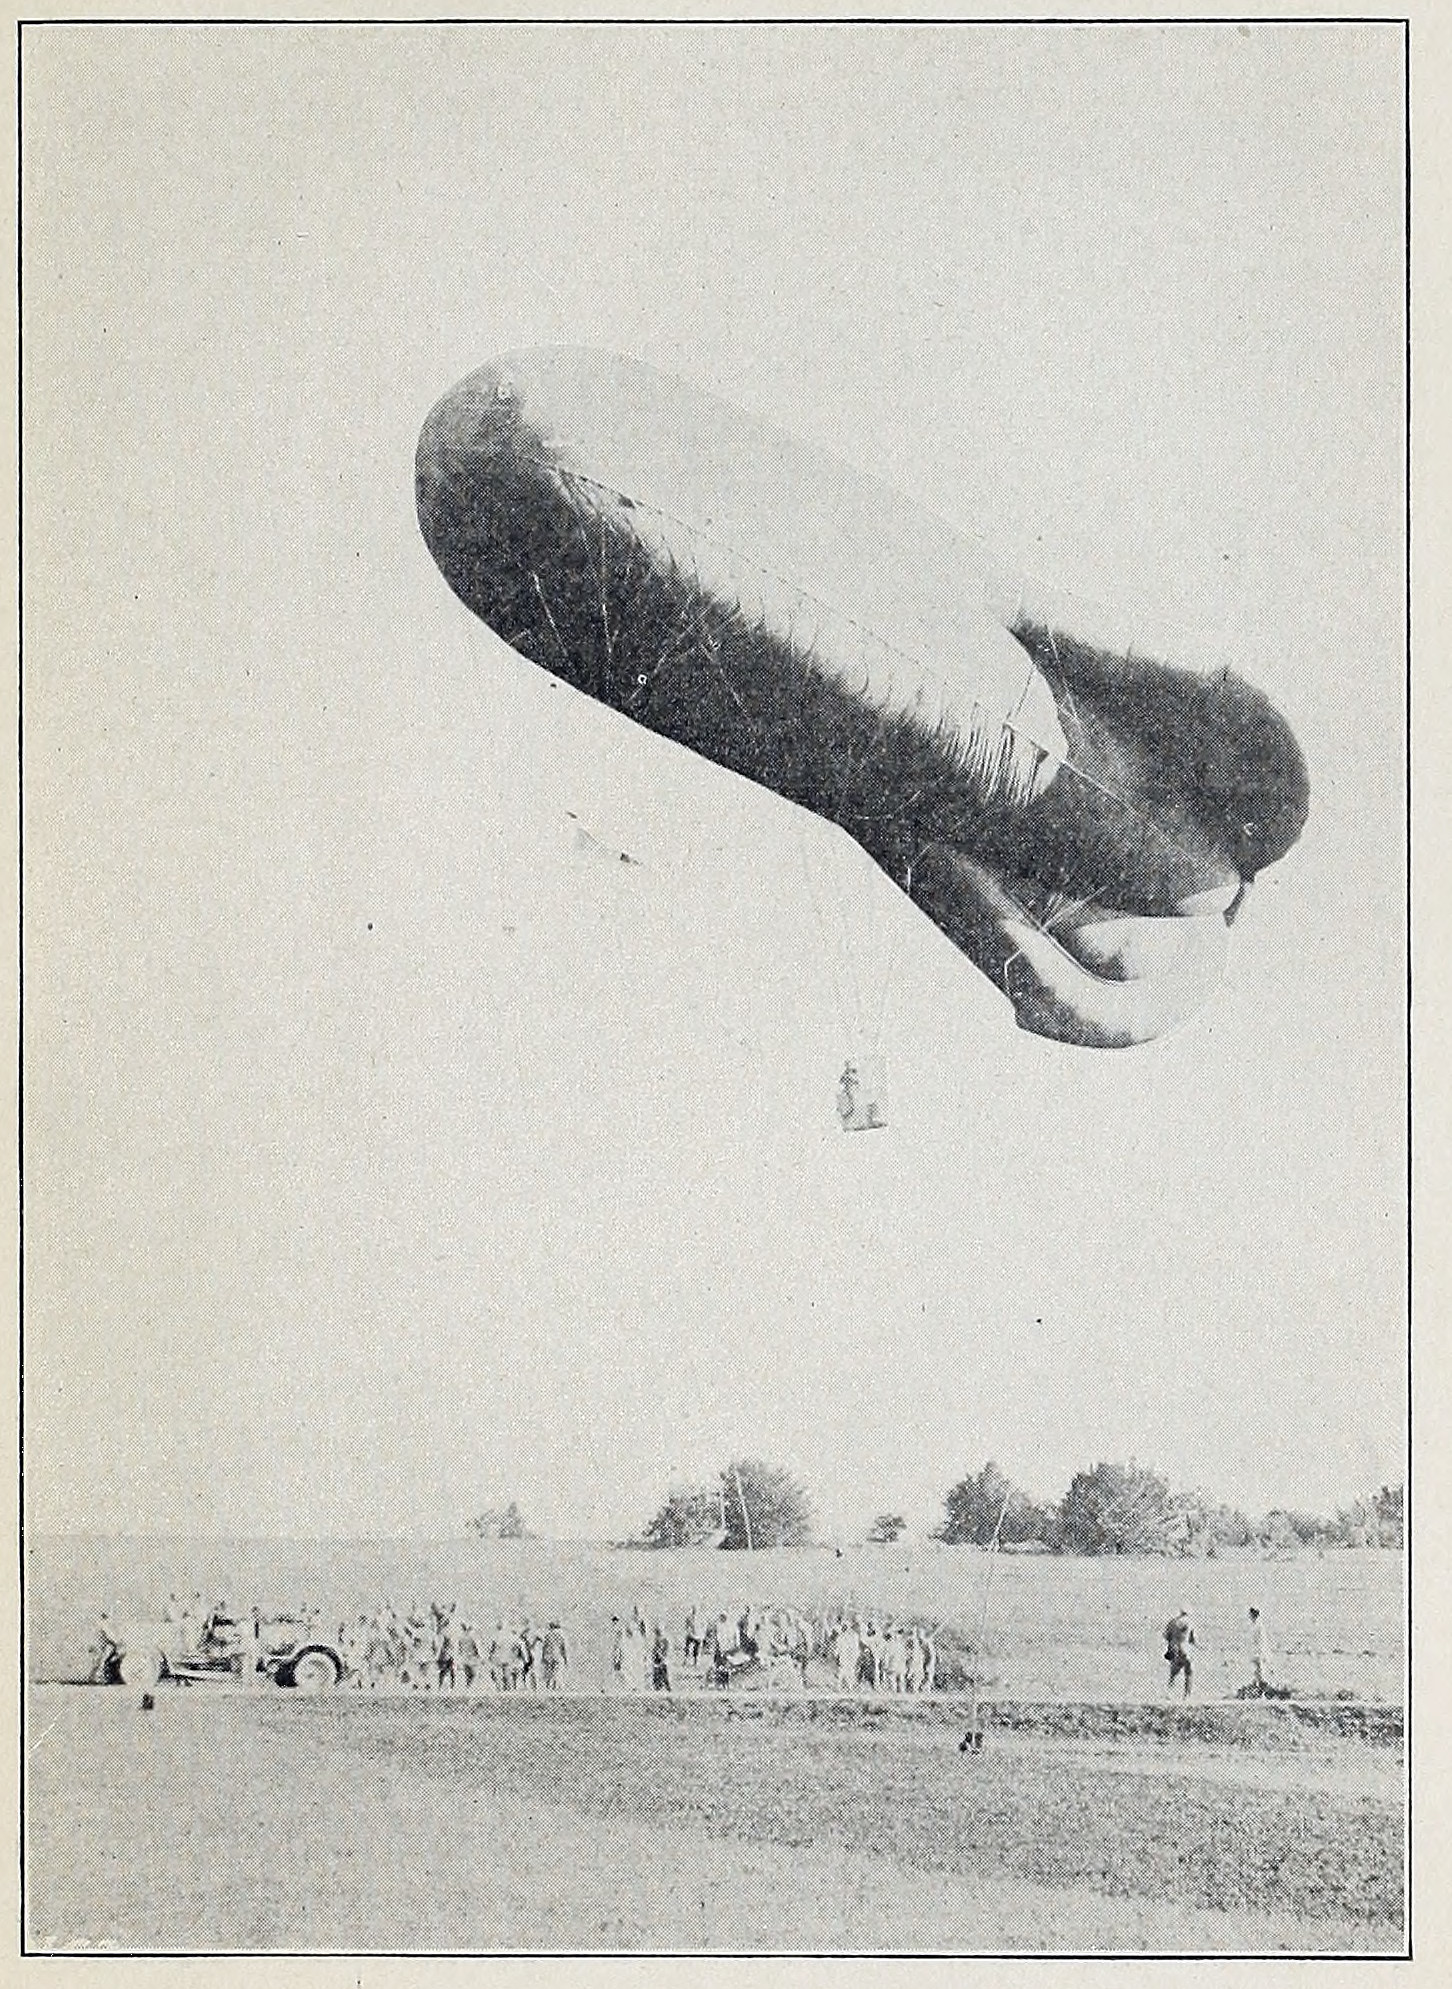 Fig. 26. American Kite Balloon of Latest Type Ascending